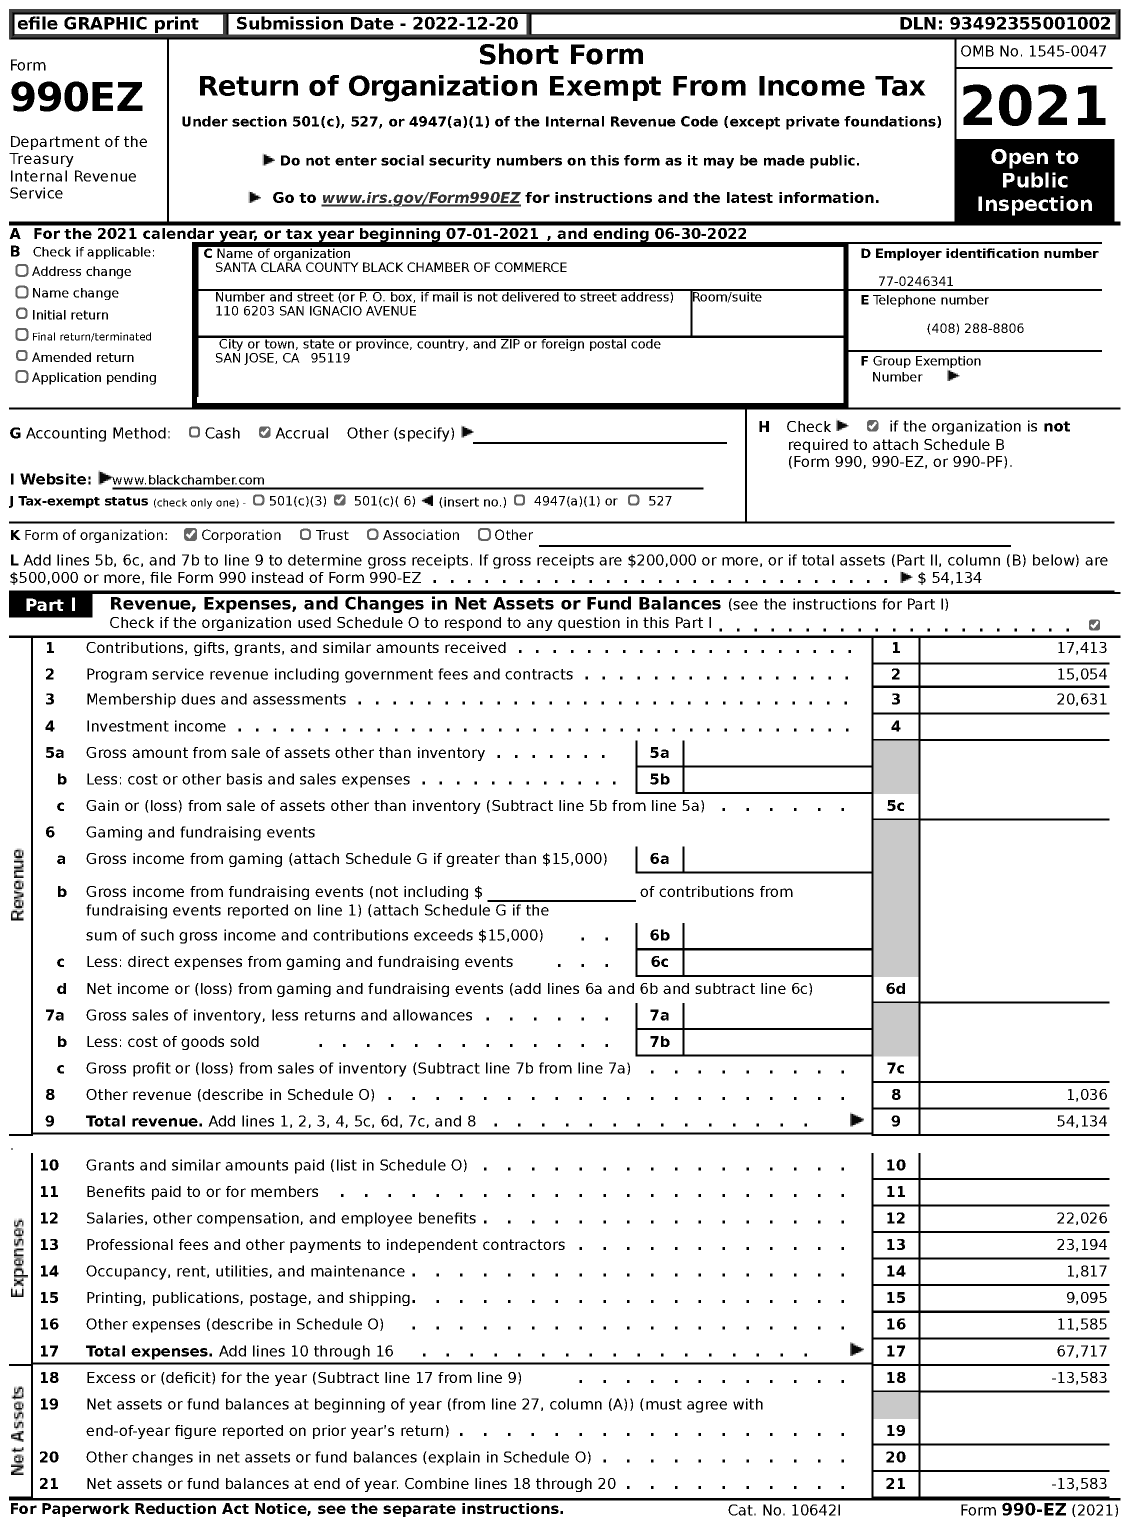 Image of first page of 2021 Form 990EZ for Santa Clara County Black Chamber of Commerce